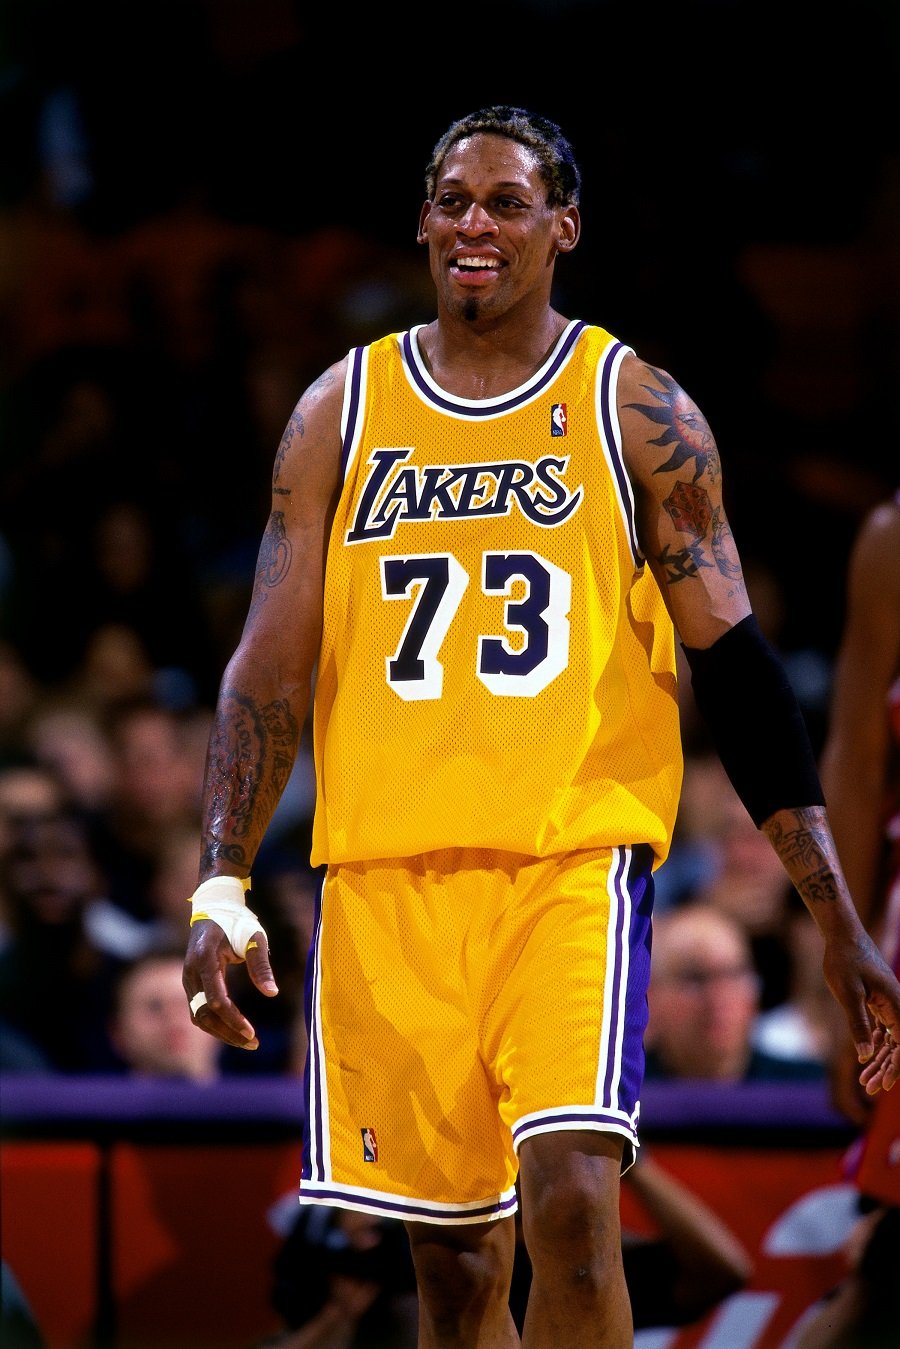 Dennis Rodman in 1999 in Los Angeles, California | Photo: Getty Images